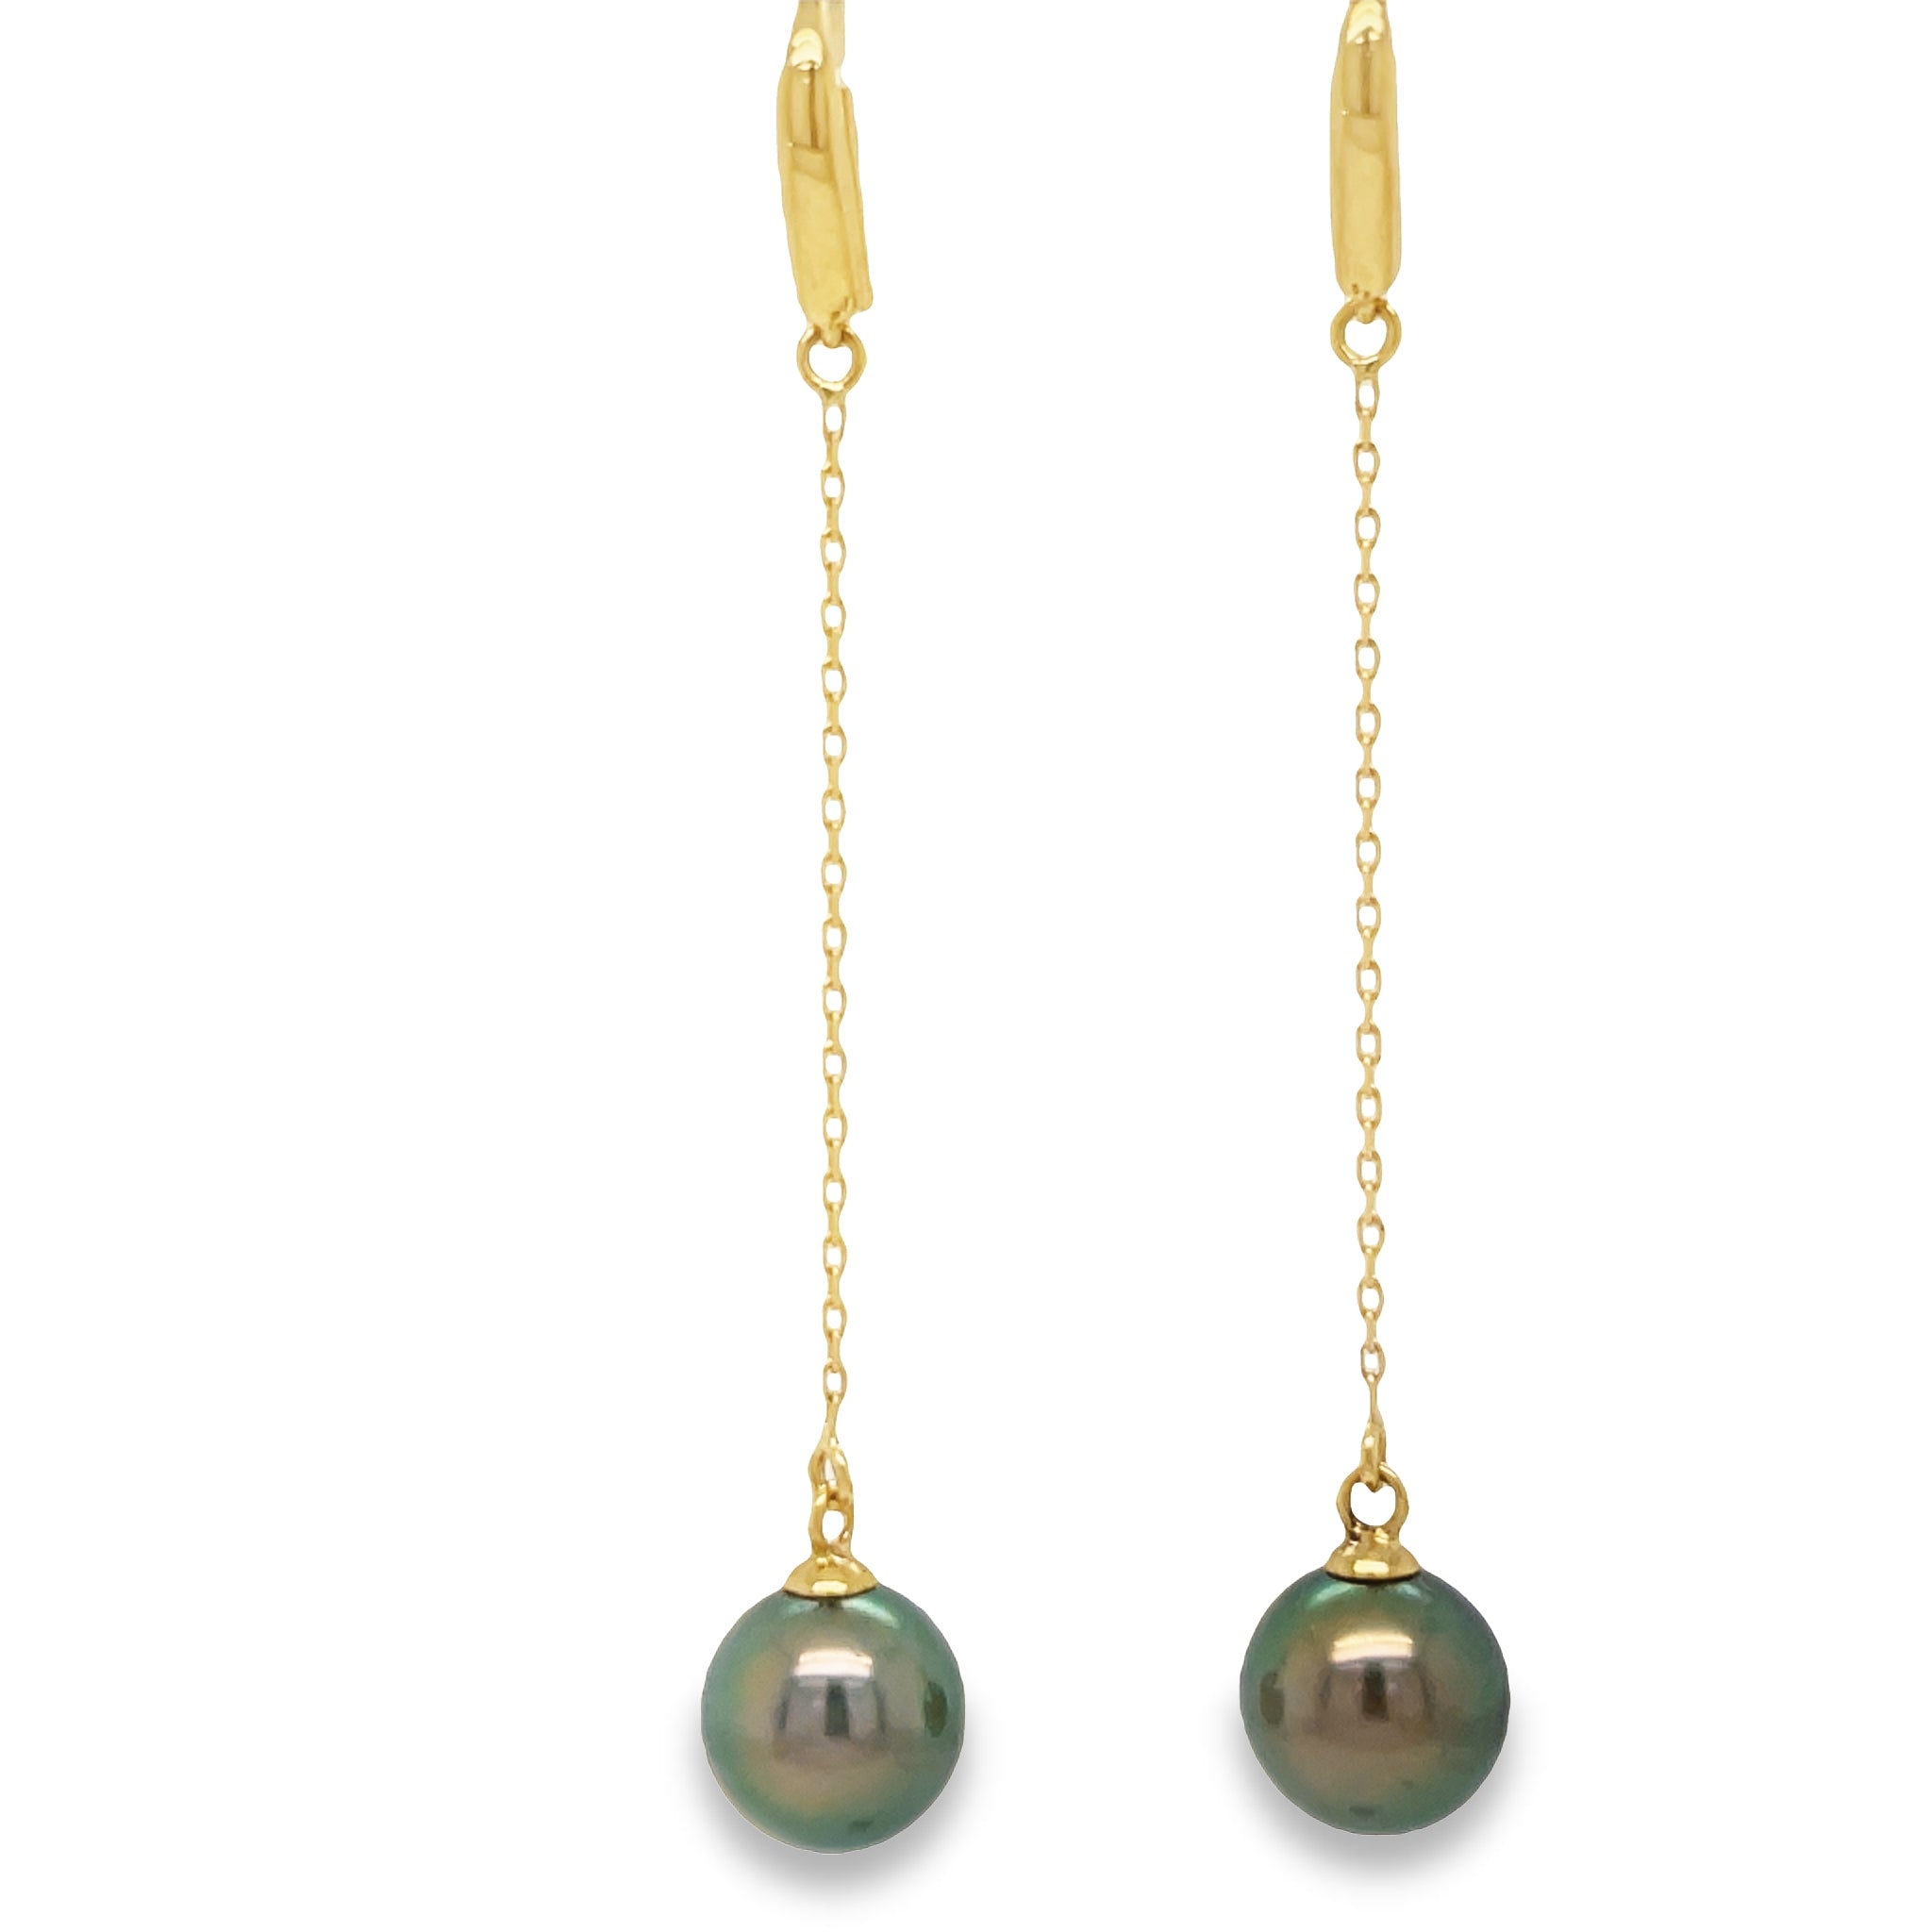 Gleam in luxury with these exquisite Tahitian pearl drop earrings. These 18K yellow gold earrings are 2.5" long and showcase 8.00 mm pearls for a look of sophistication and elegance. Adorn yourself with timeless beauty that evokes grace and splendor.